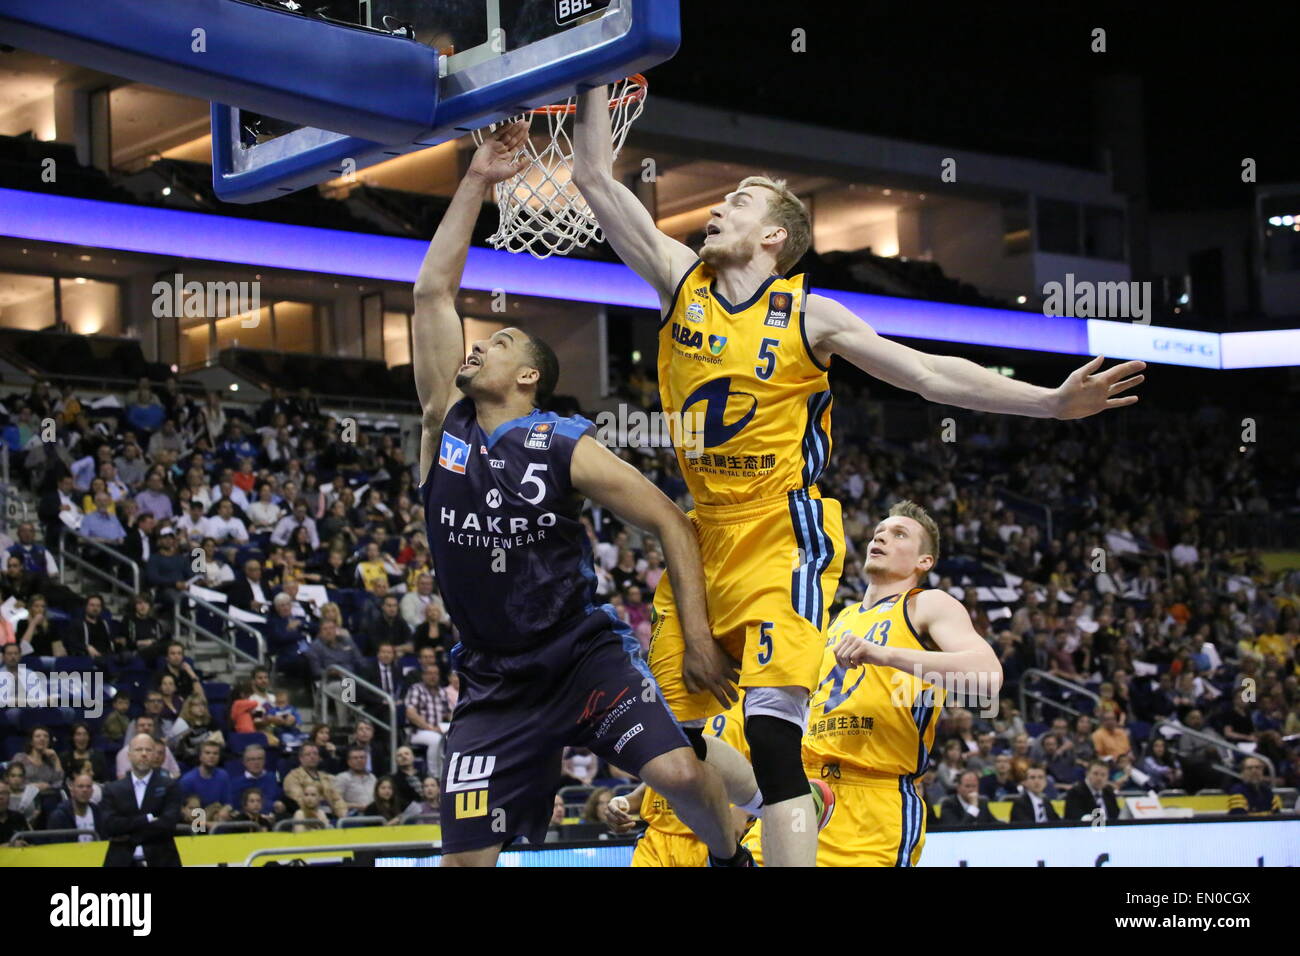 Berlin, Germany. 24th Apr, 2015. Niels Giffey (5) and Chad Timberlake (5) in action during BBL game Alba Berlin versus Crailsheim Merlins at O2 World. Credit:  Madeleine Lenz/Pacific Press/Alamy Live News Stock Photo